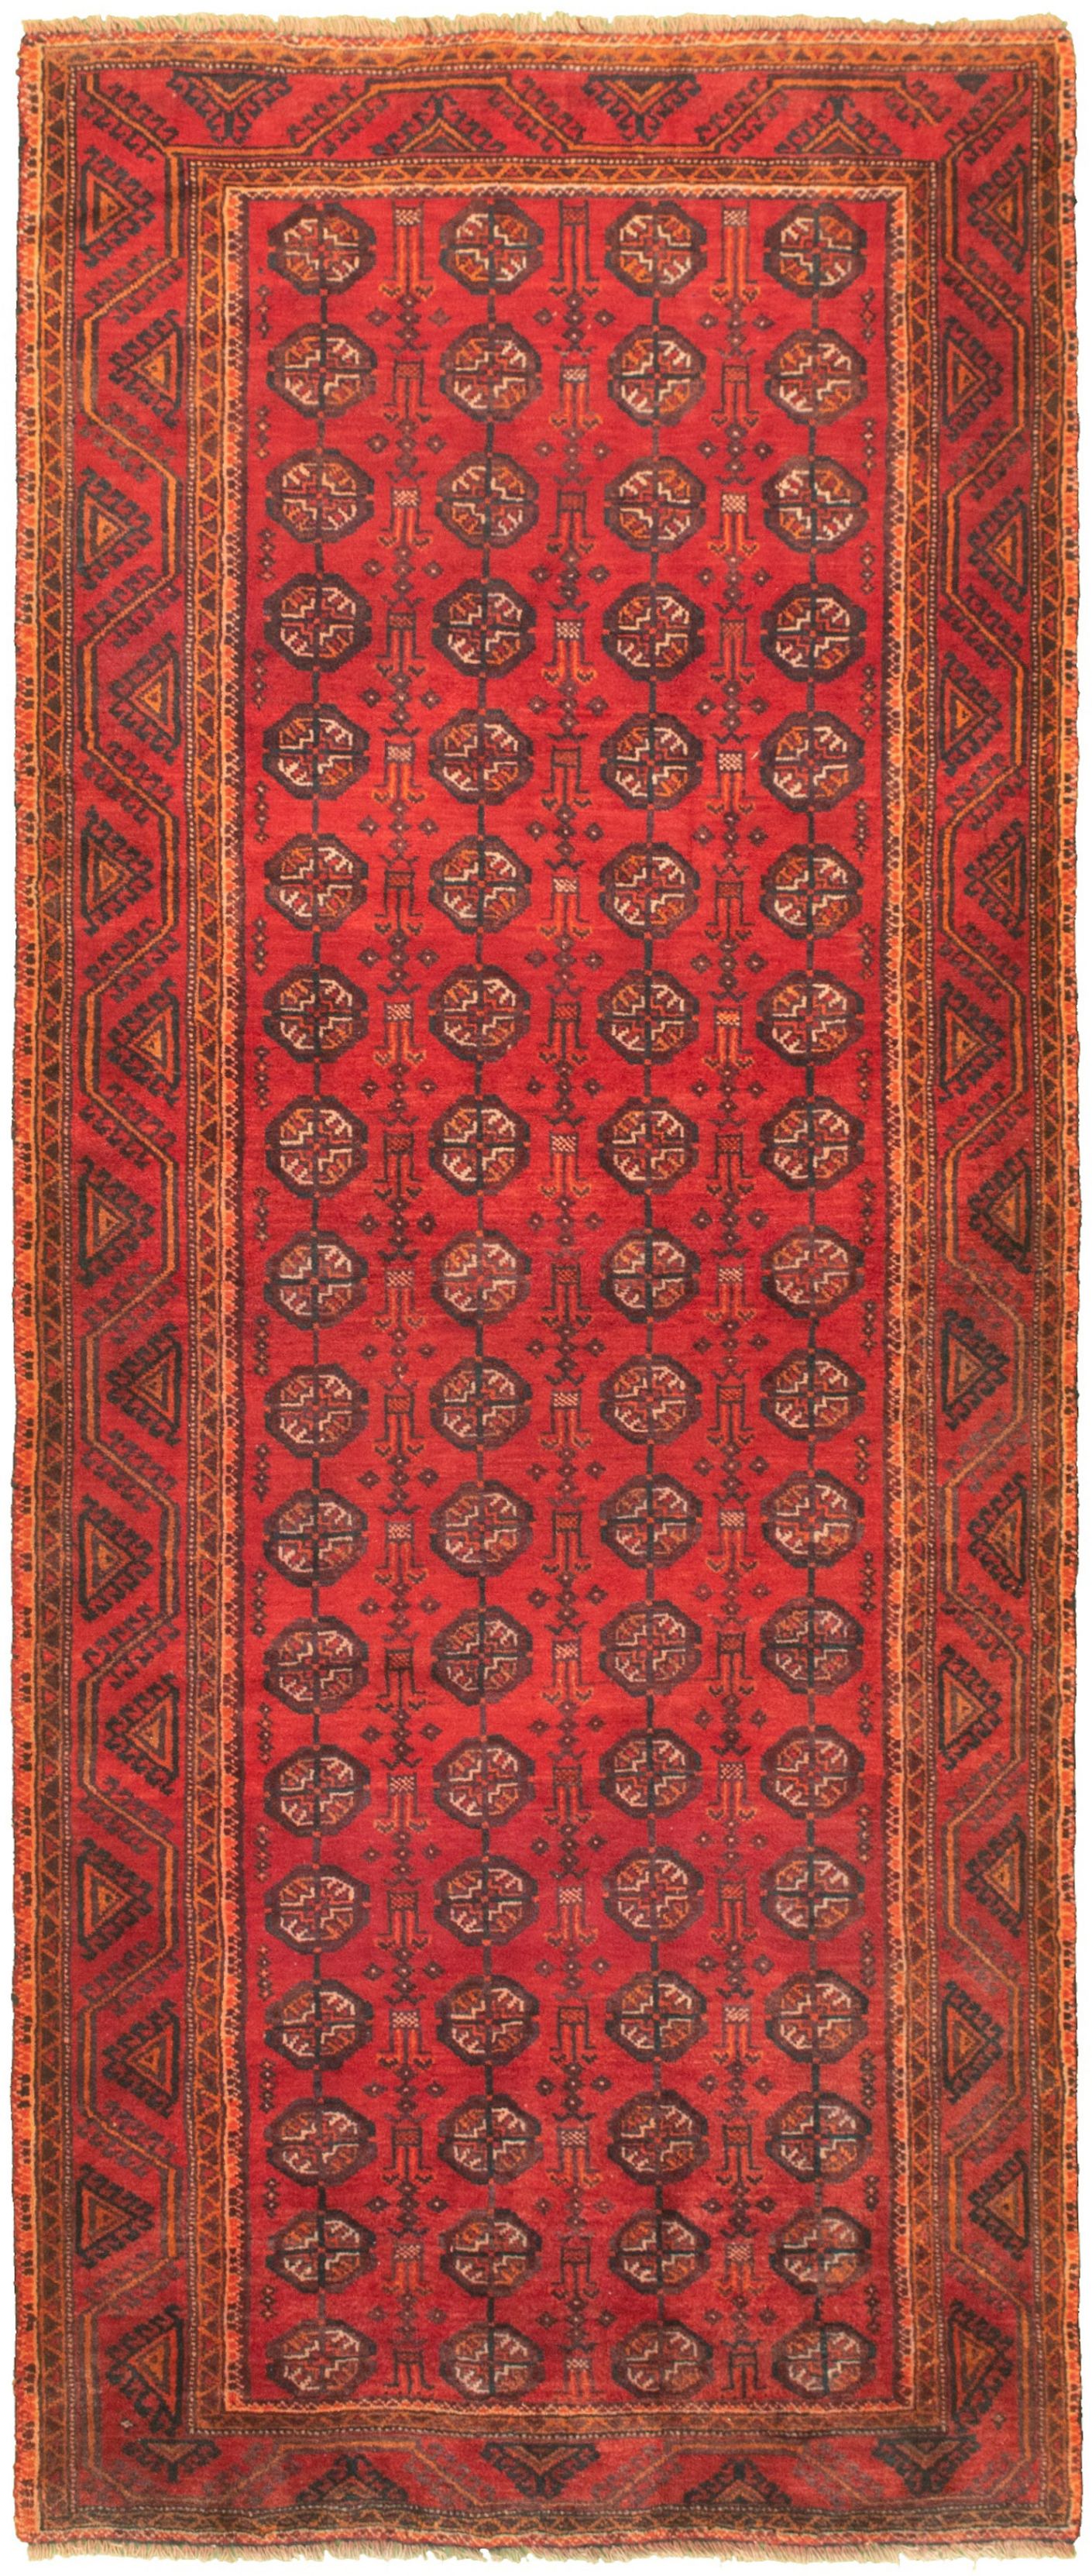 Hand-knotted Shiravan Bokhara Red Wool Rug 3'10" x 9'6" Size: 3'10" x 9'6"  